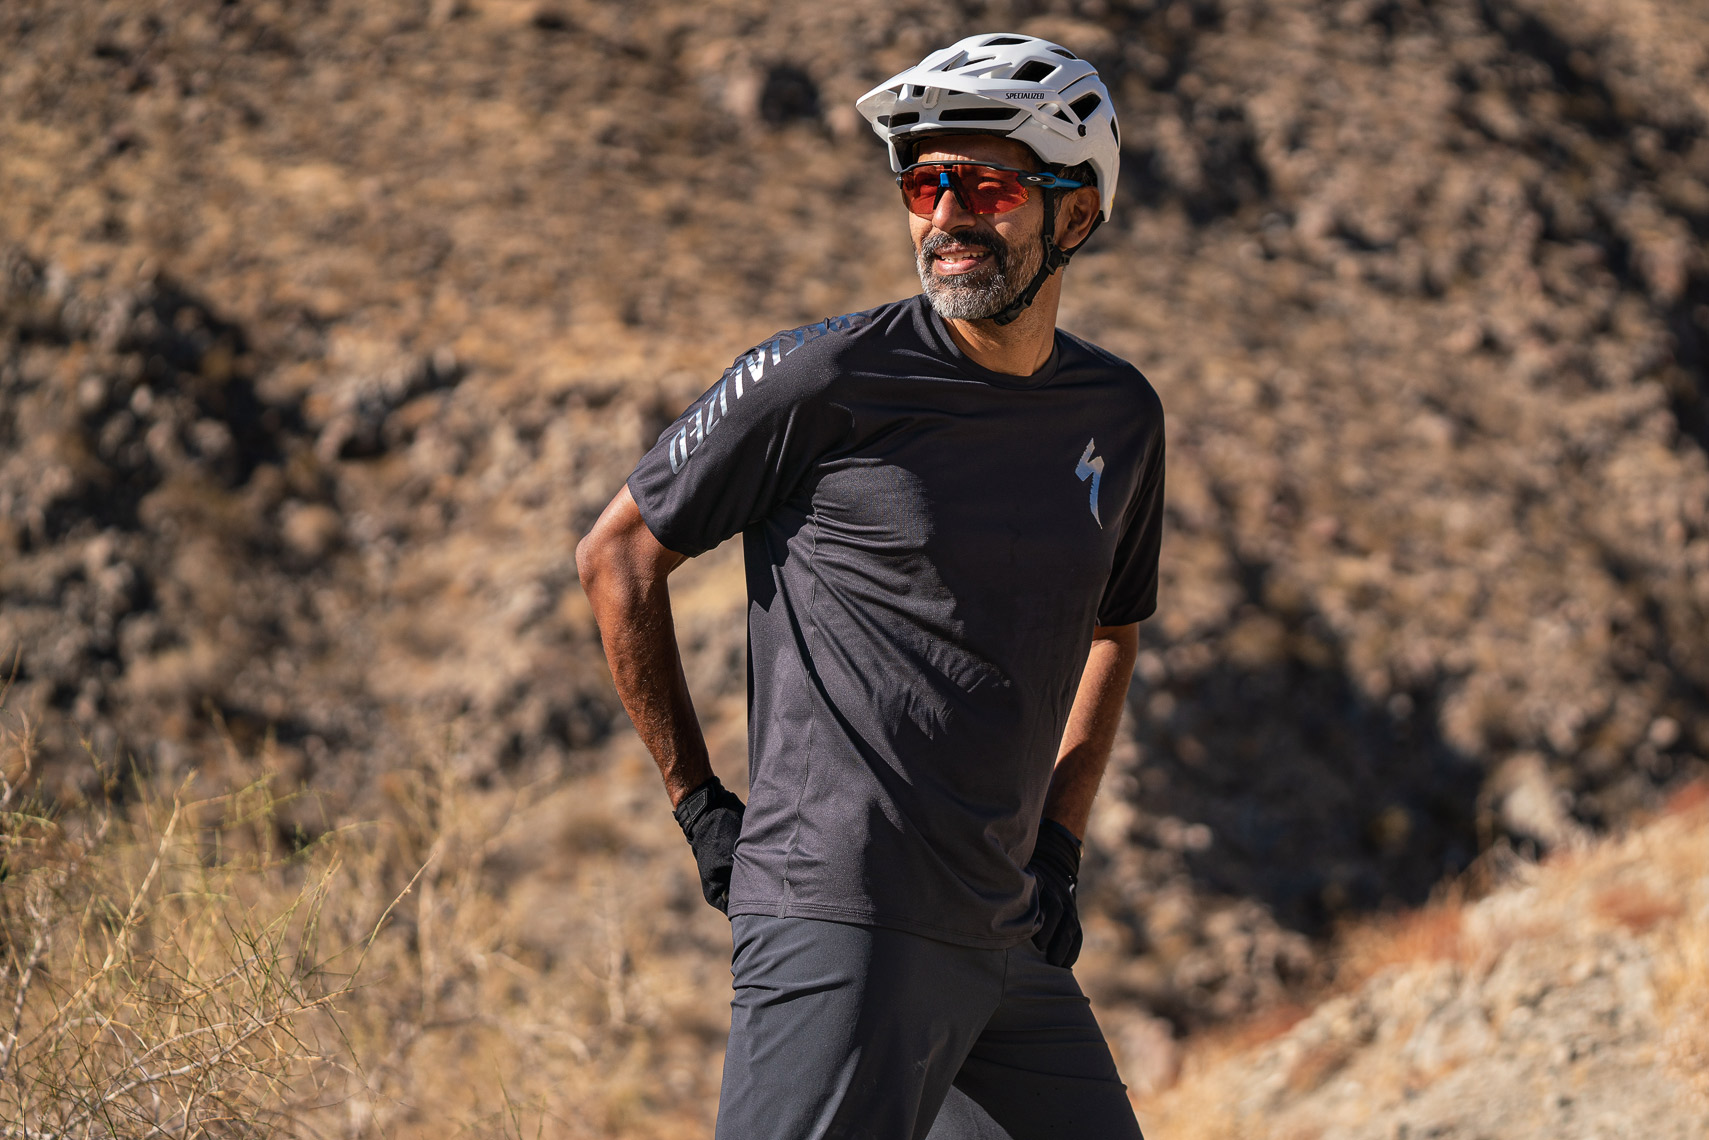 Specialized_S21_MTB_Clothing_Palm_Springs_VanWeelden-252